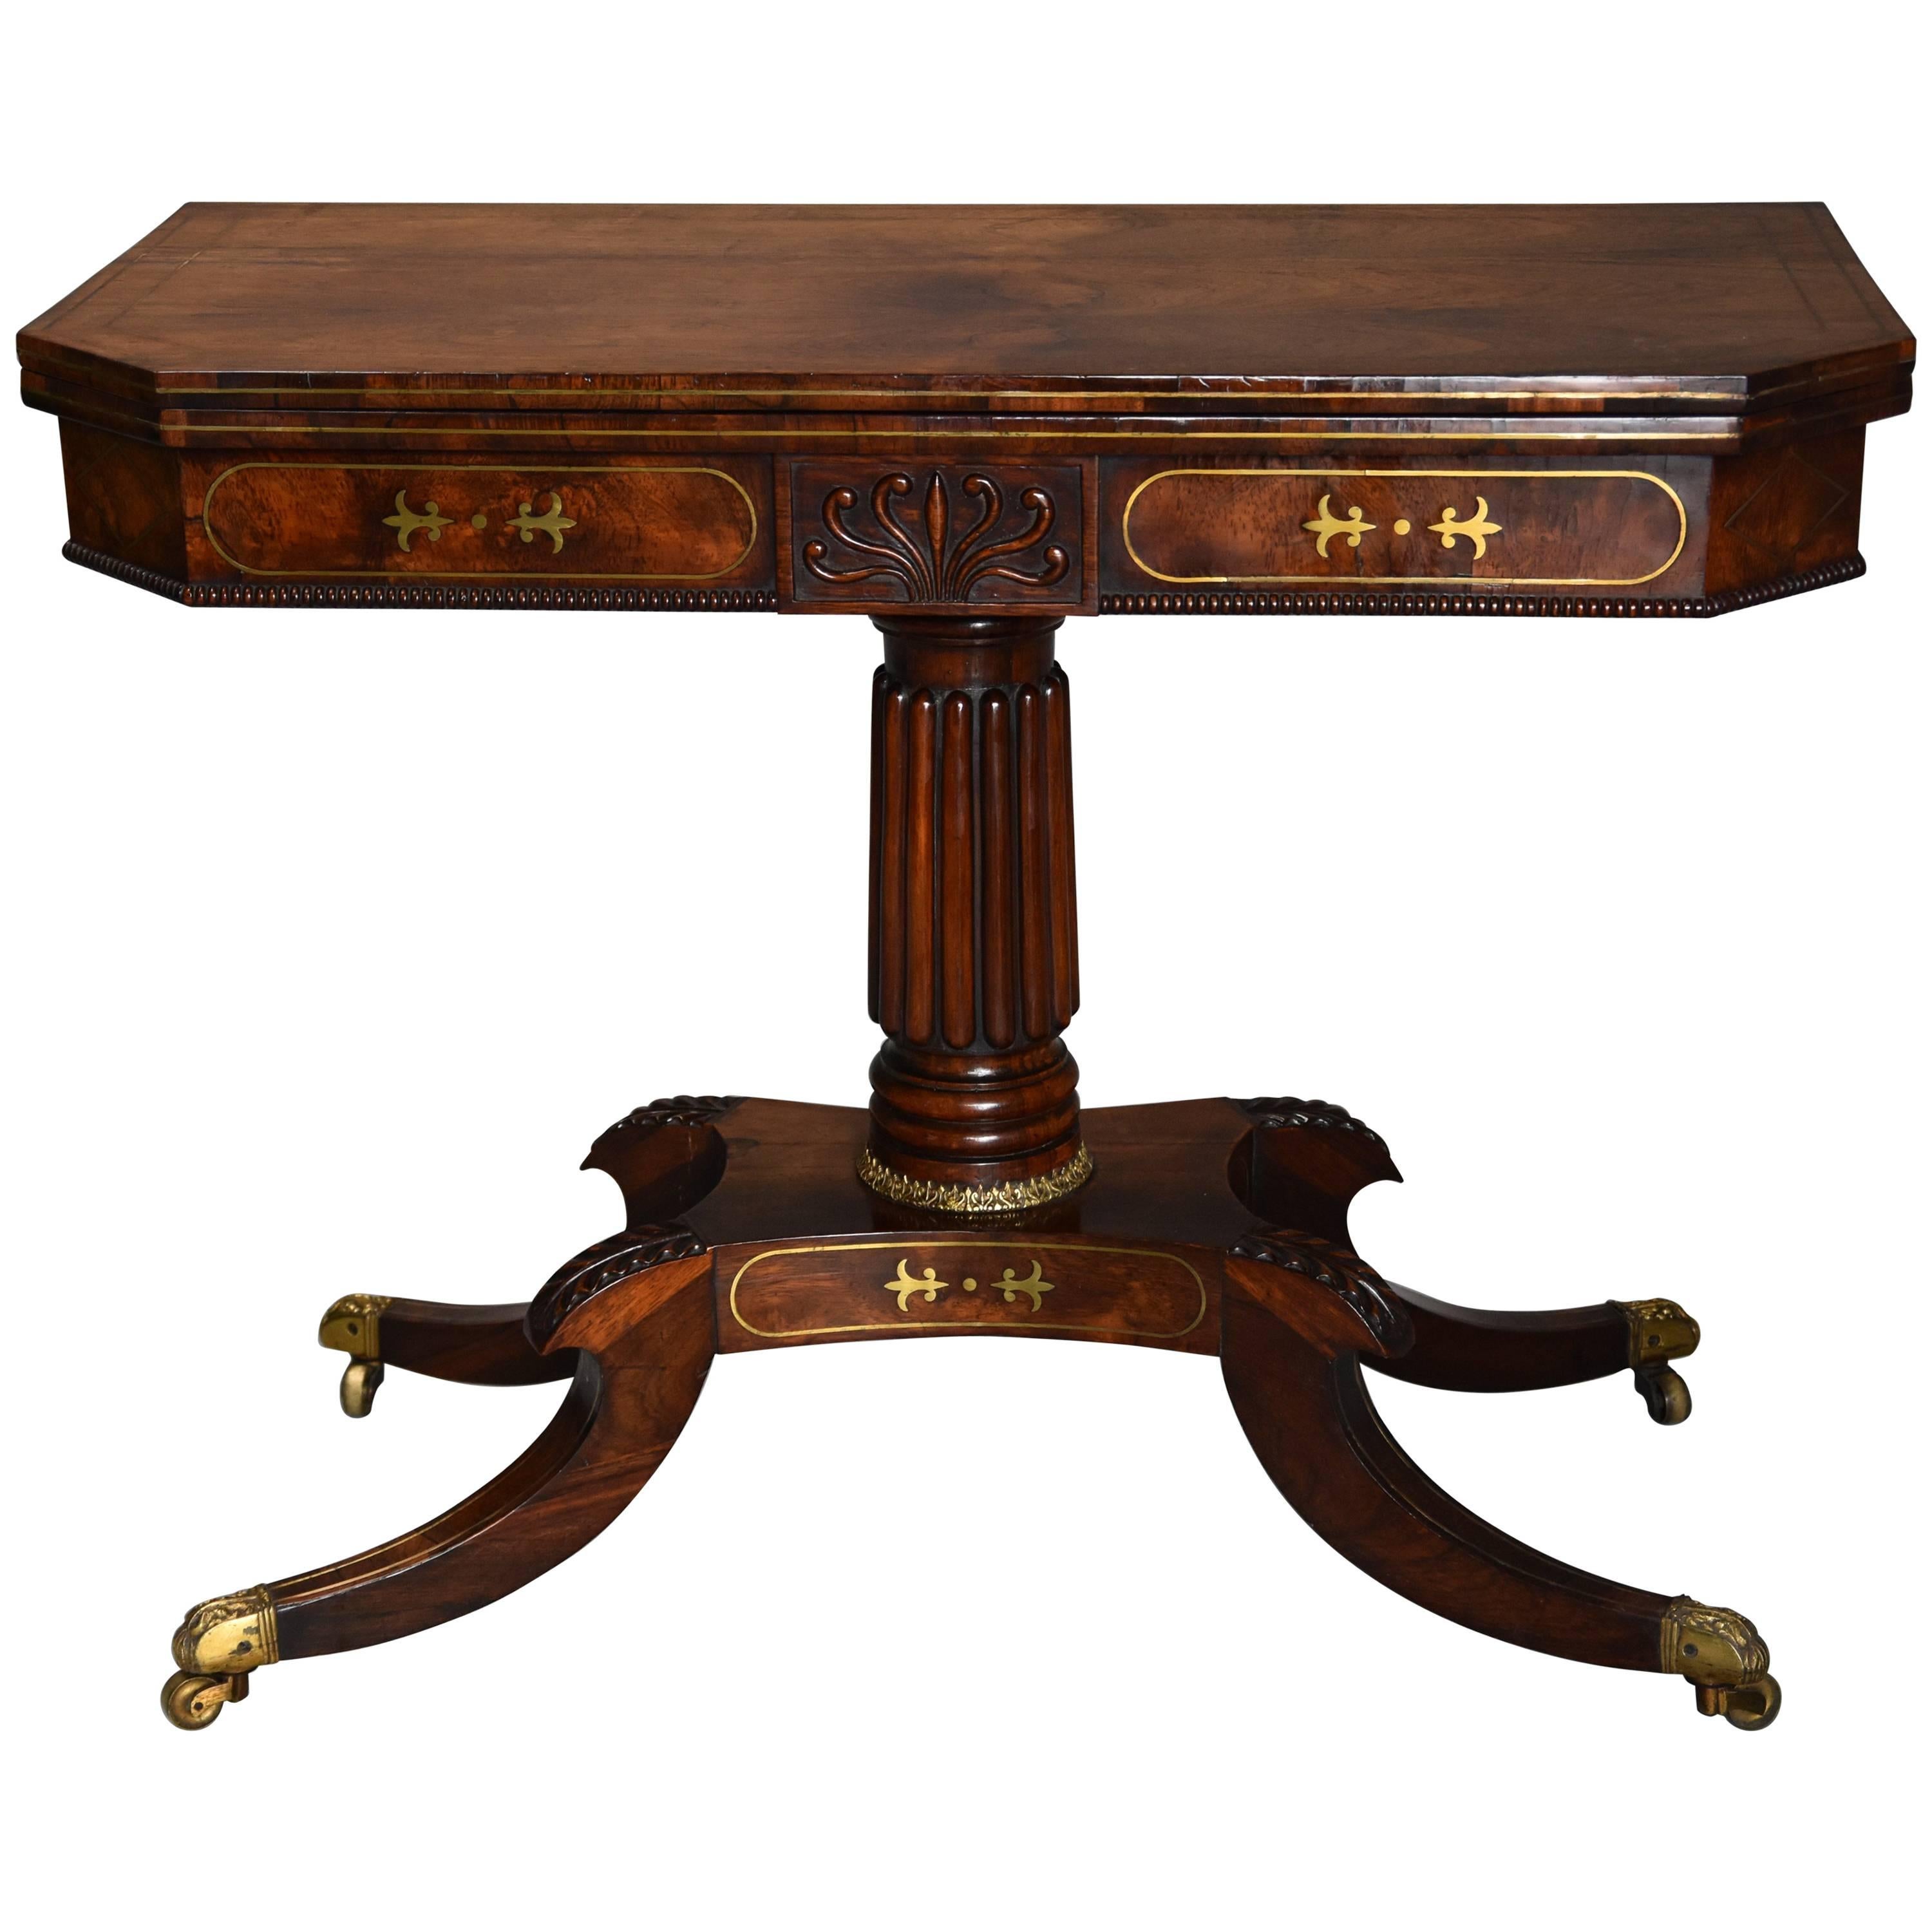 Regency Rosewood Card Table with Brass Inlaid Decoration of Super Quality